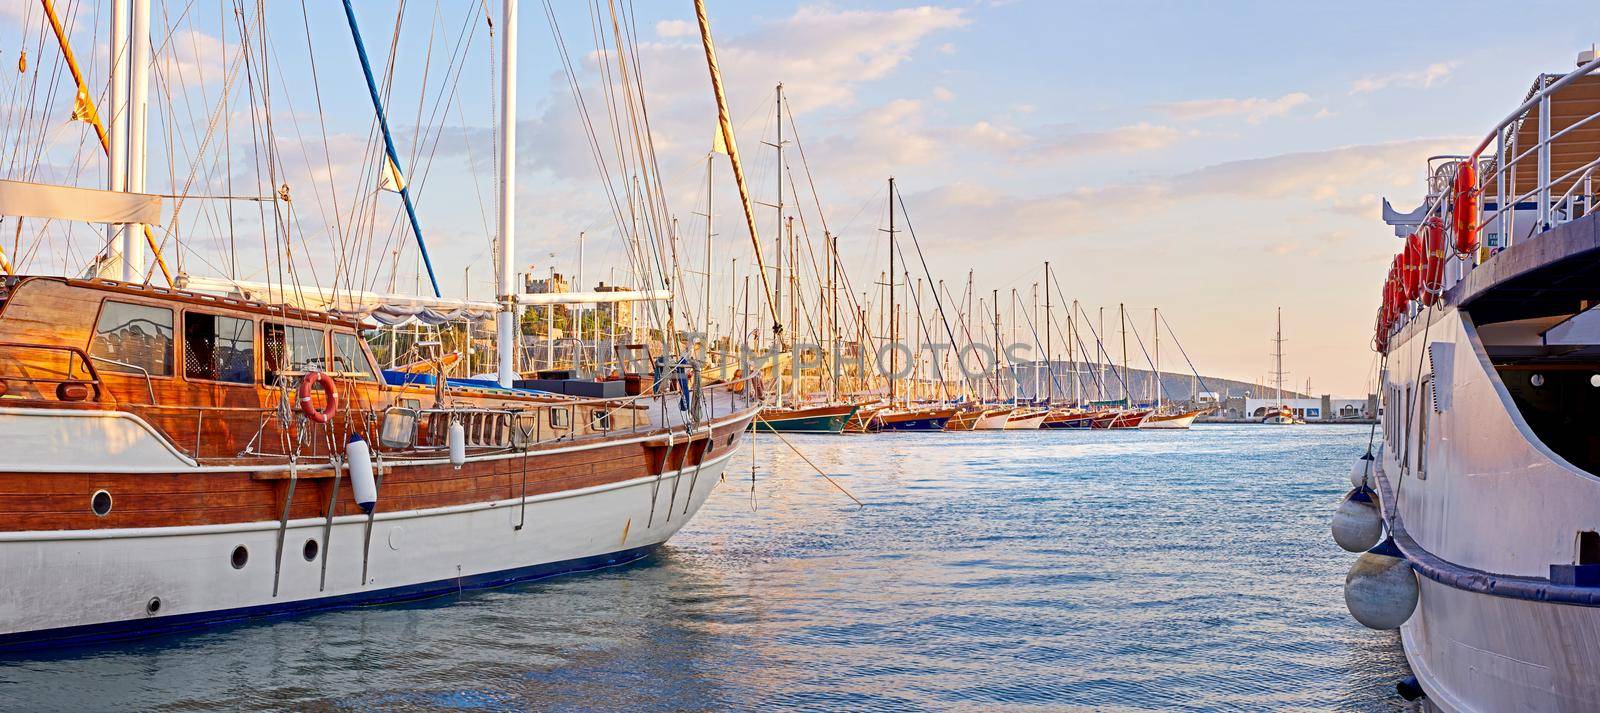 The marine harbor of Bodrum, Turkey. Scenic view of expensive yachts moored in Milta Marina. Closeup of boats and yachts docked at a port or pier during sunset on the water during a warm summer day.